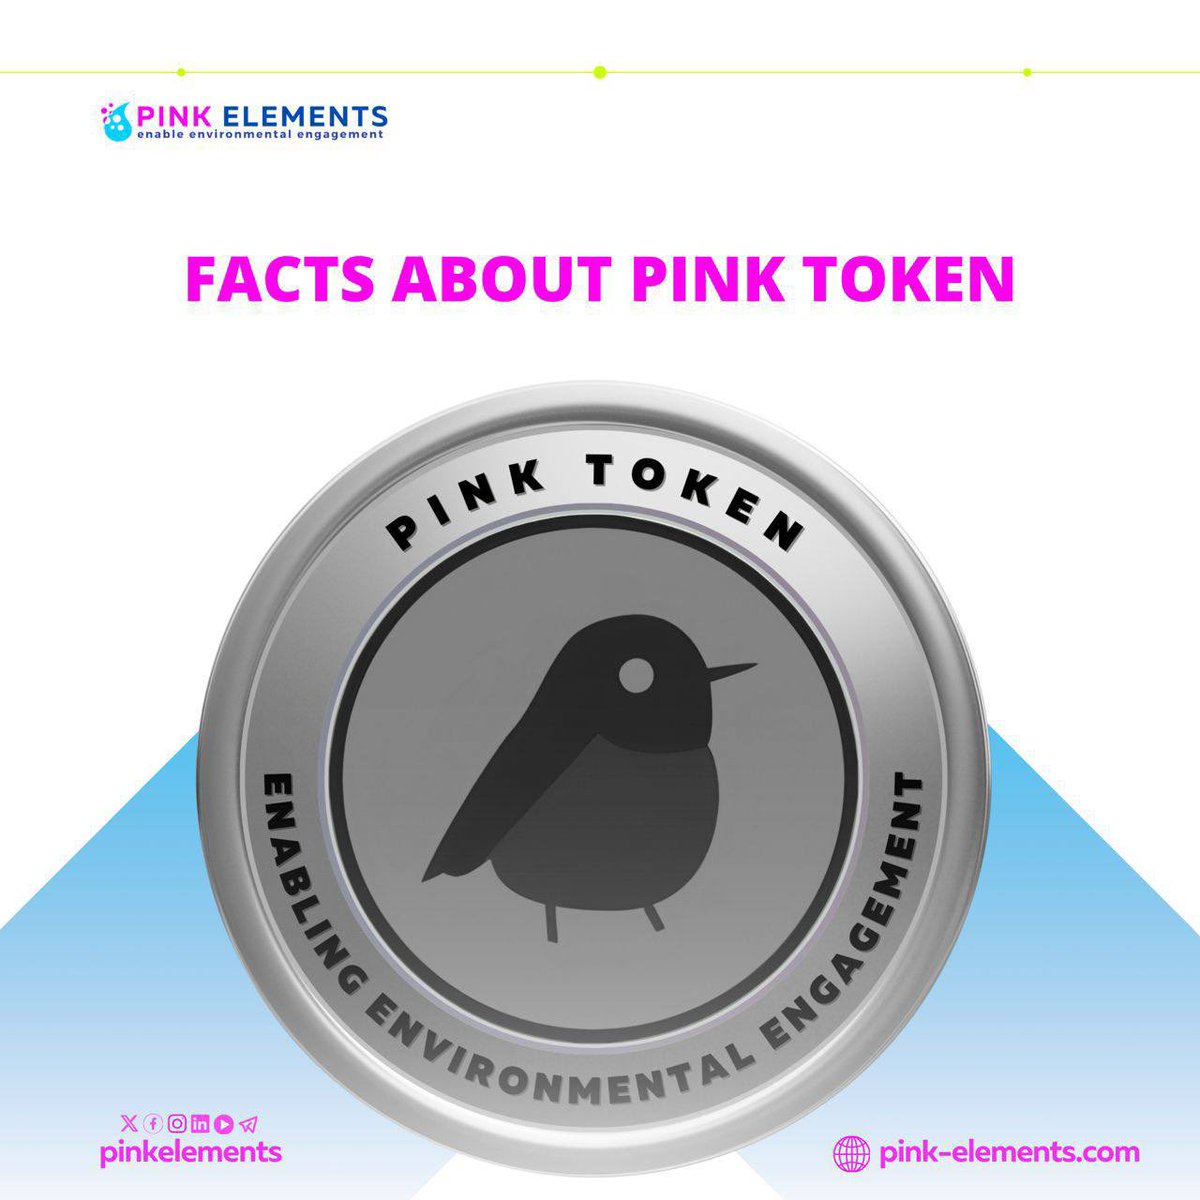 Below are some facts about Pink Token👇 1, 10 billion Pink Tokens issued over a 10-year period. Criteria and deadlines are publicly visible via smart contracts and cannot be changed. Read more👇